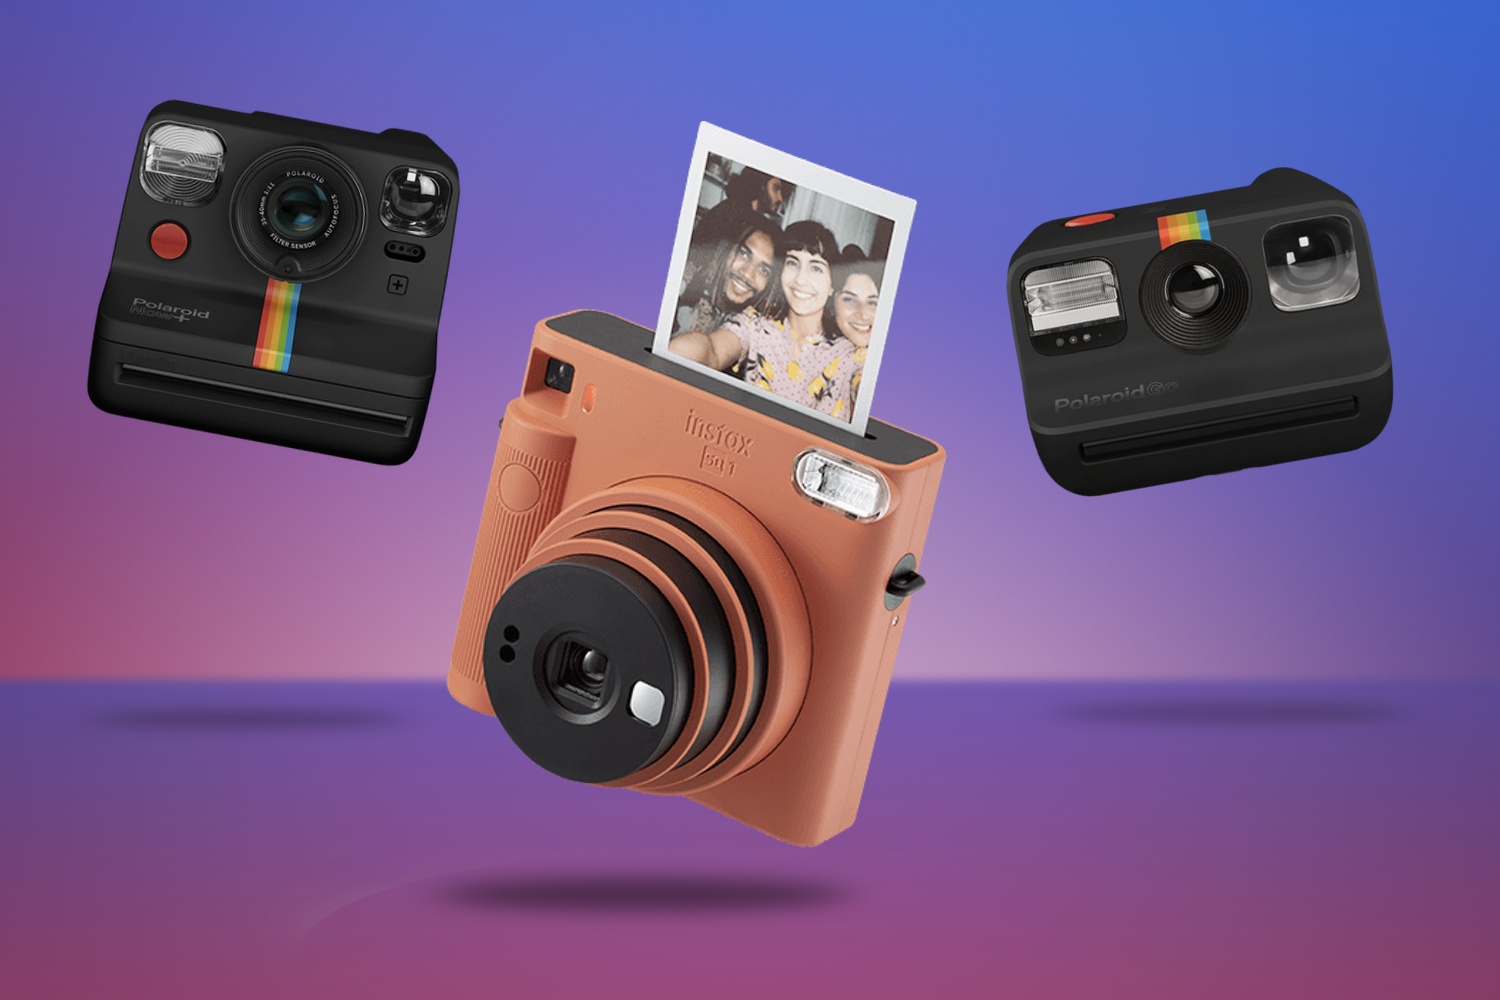 The Go is Polaroid's smallest instant camera yet, and under $100